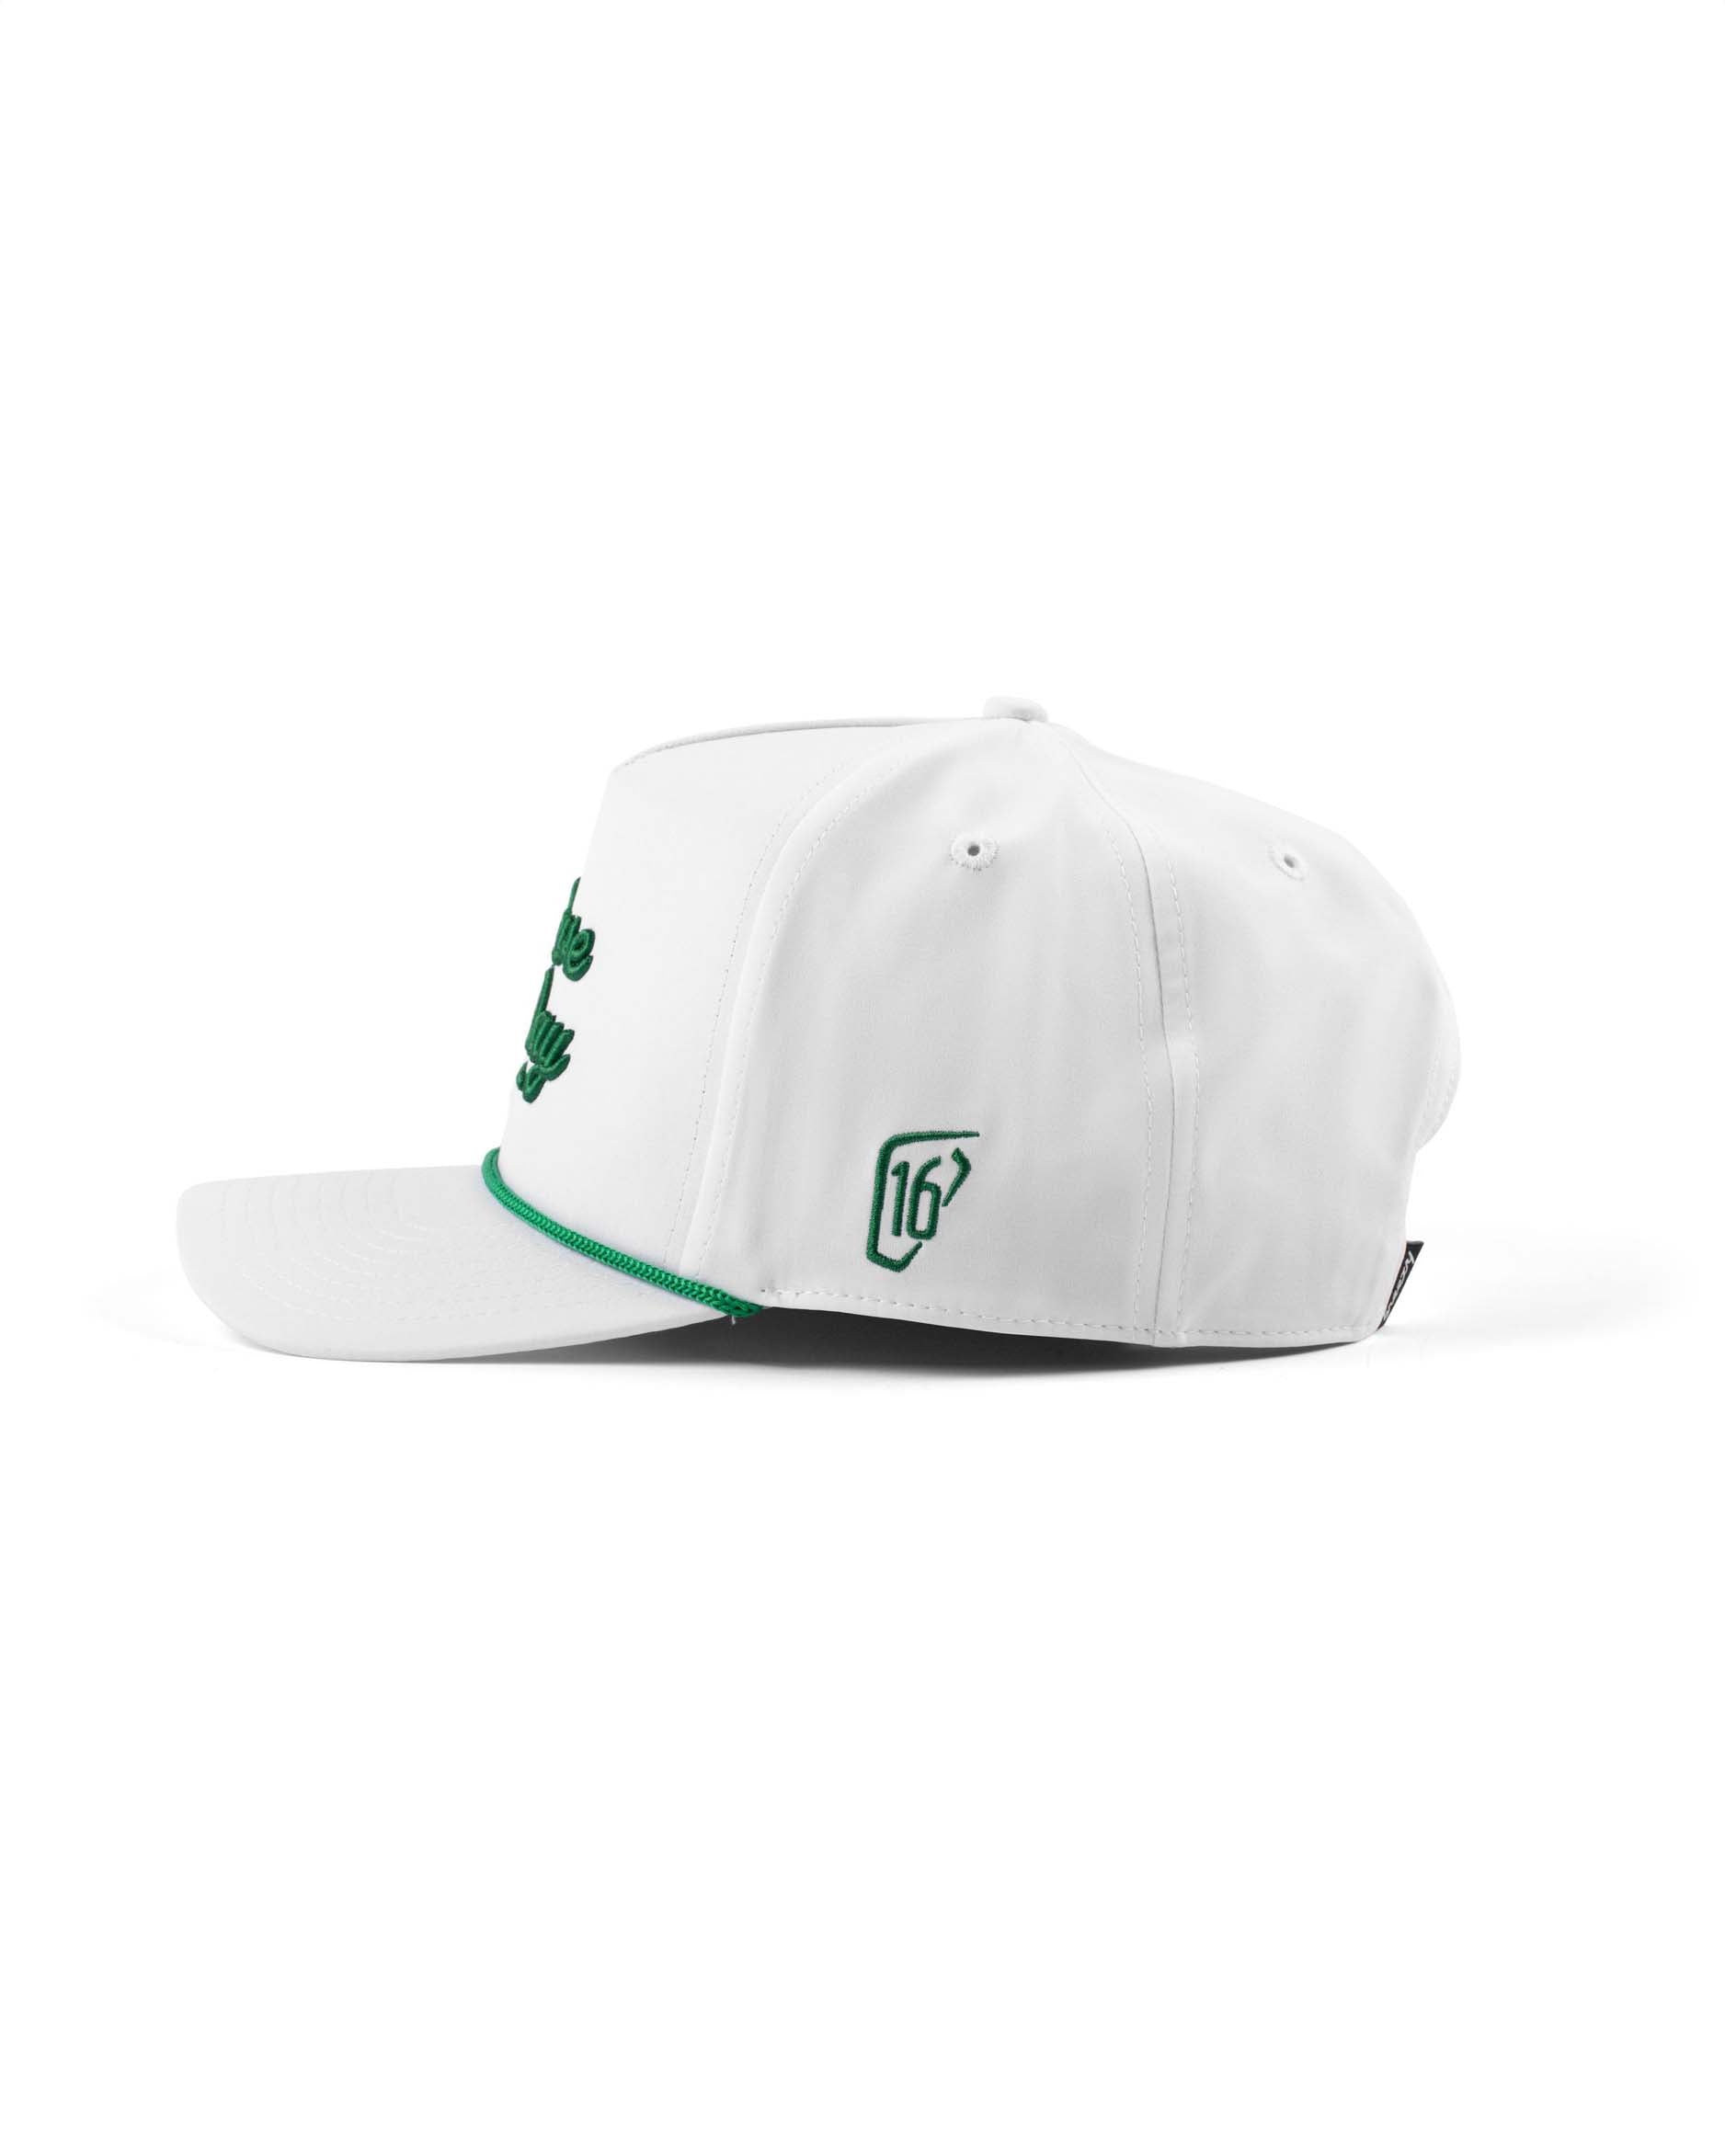 WM Phoenix Open x Breezy Have a Day White Rope Hat